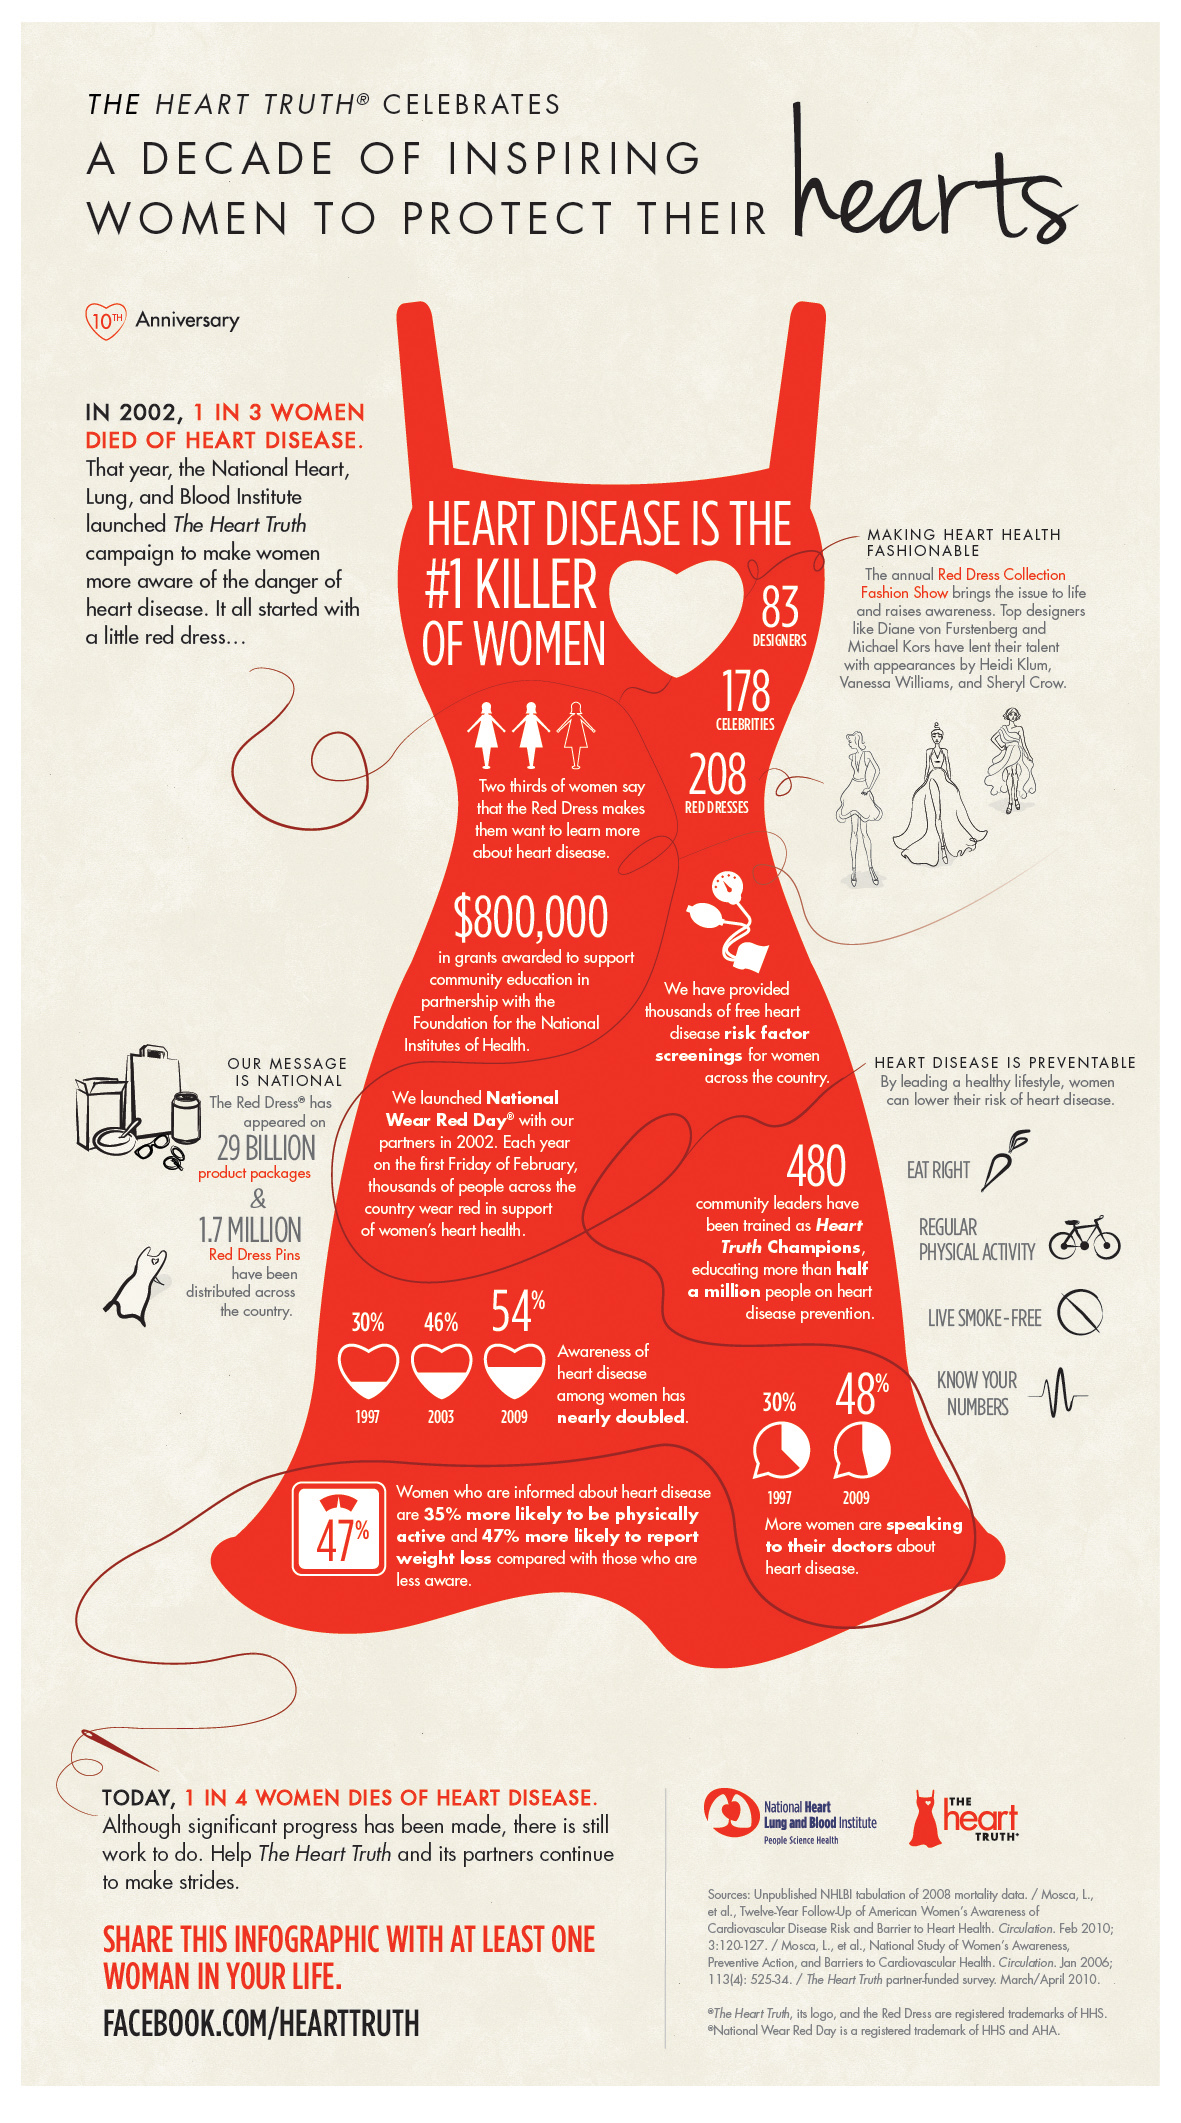 The Heart Truth info graphic